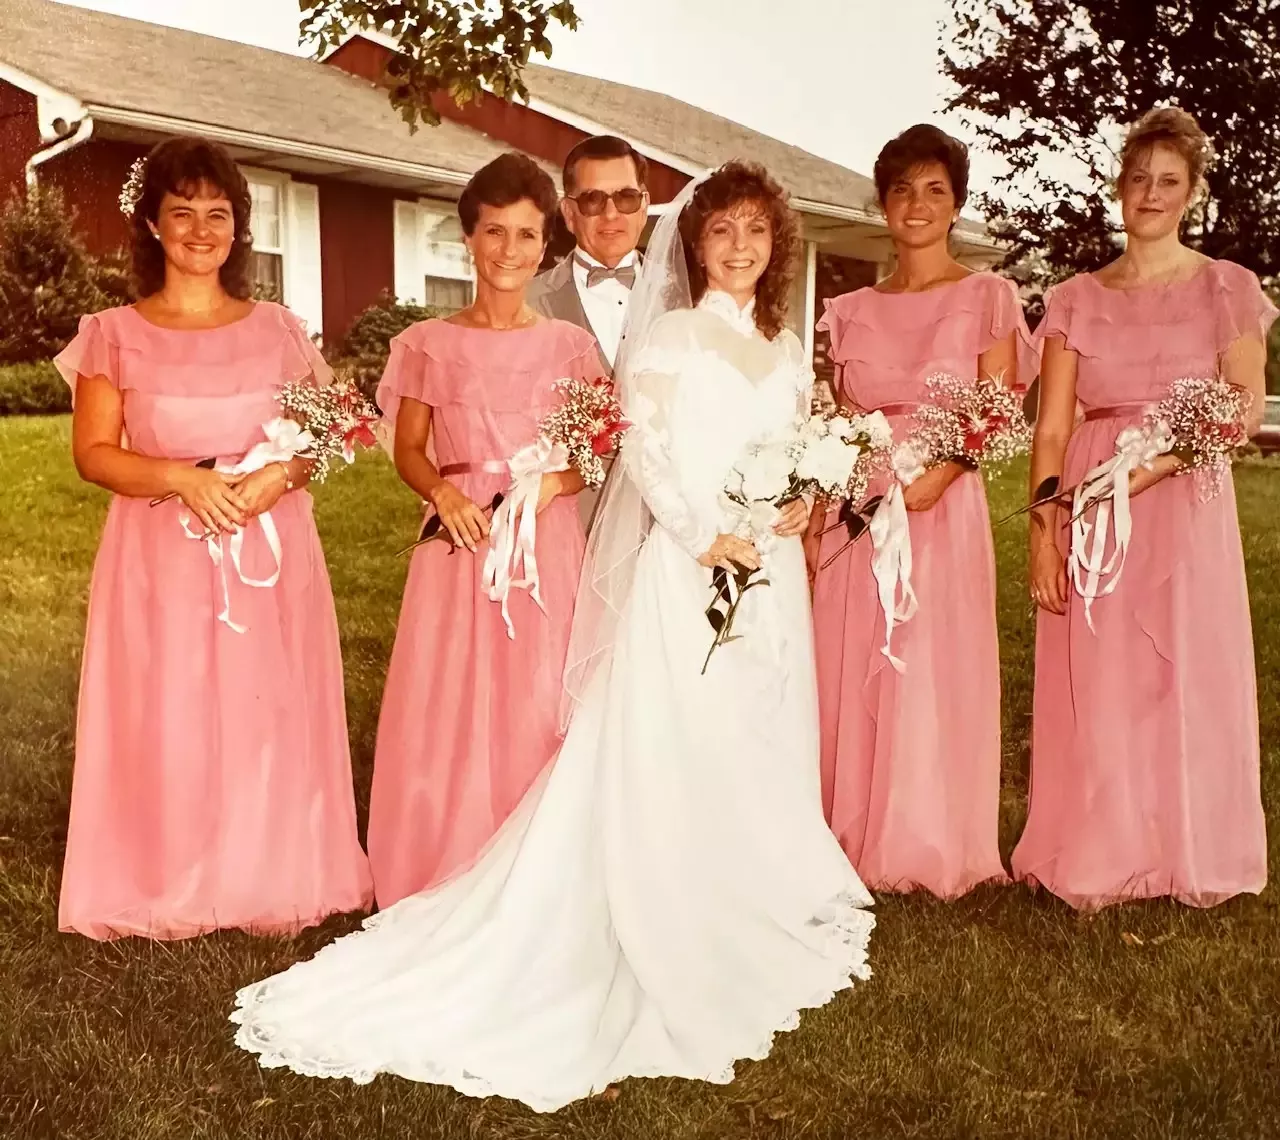 Restyling mom's vintage wedding dress is the hot bridal trend